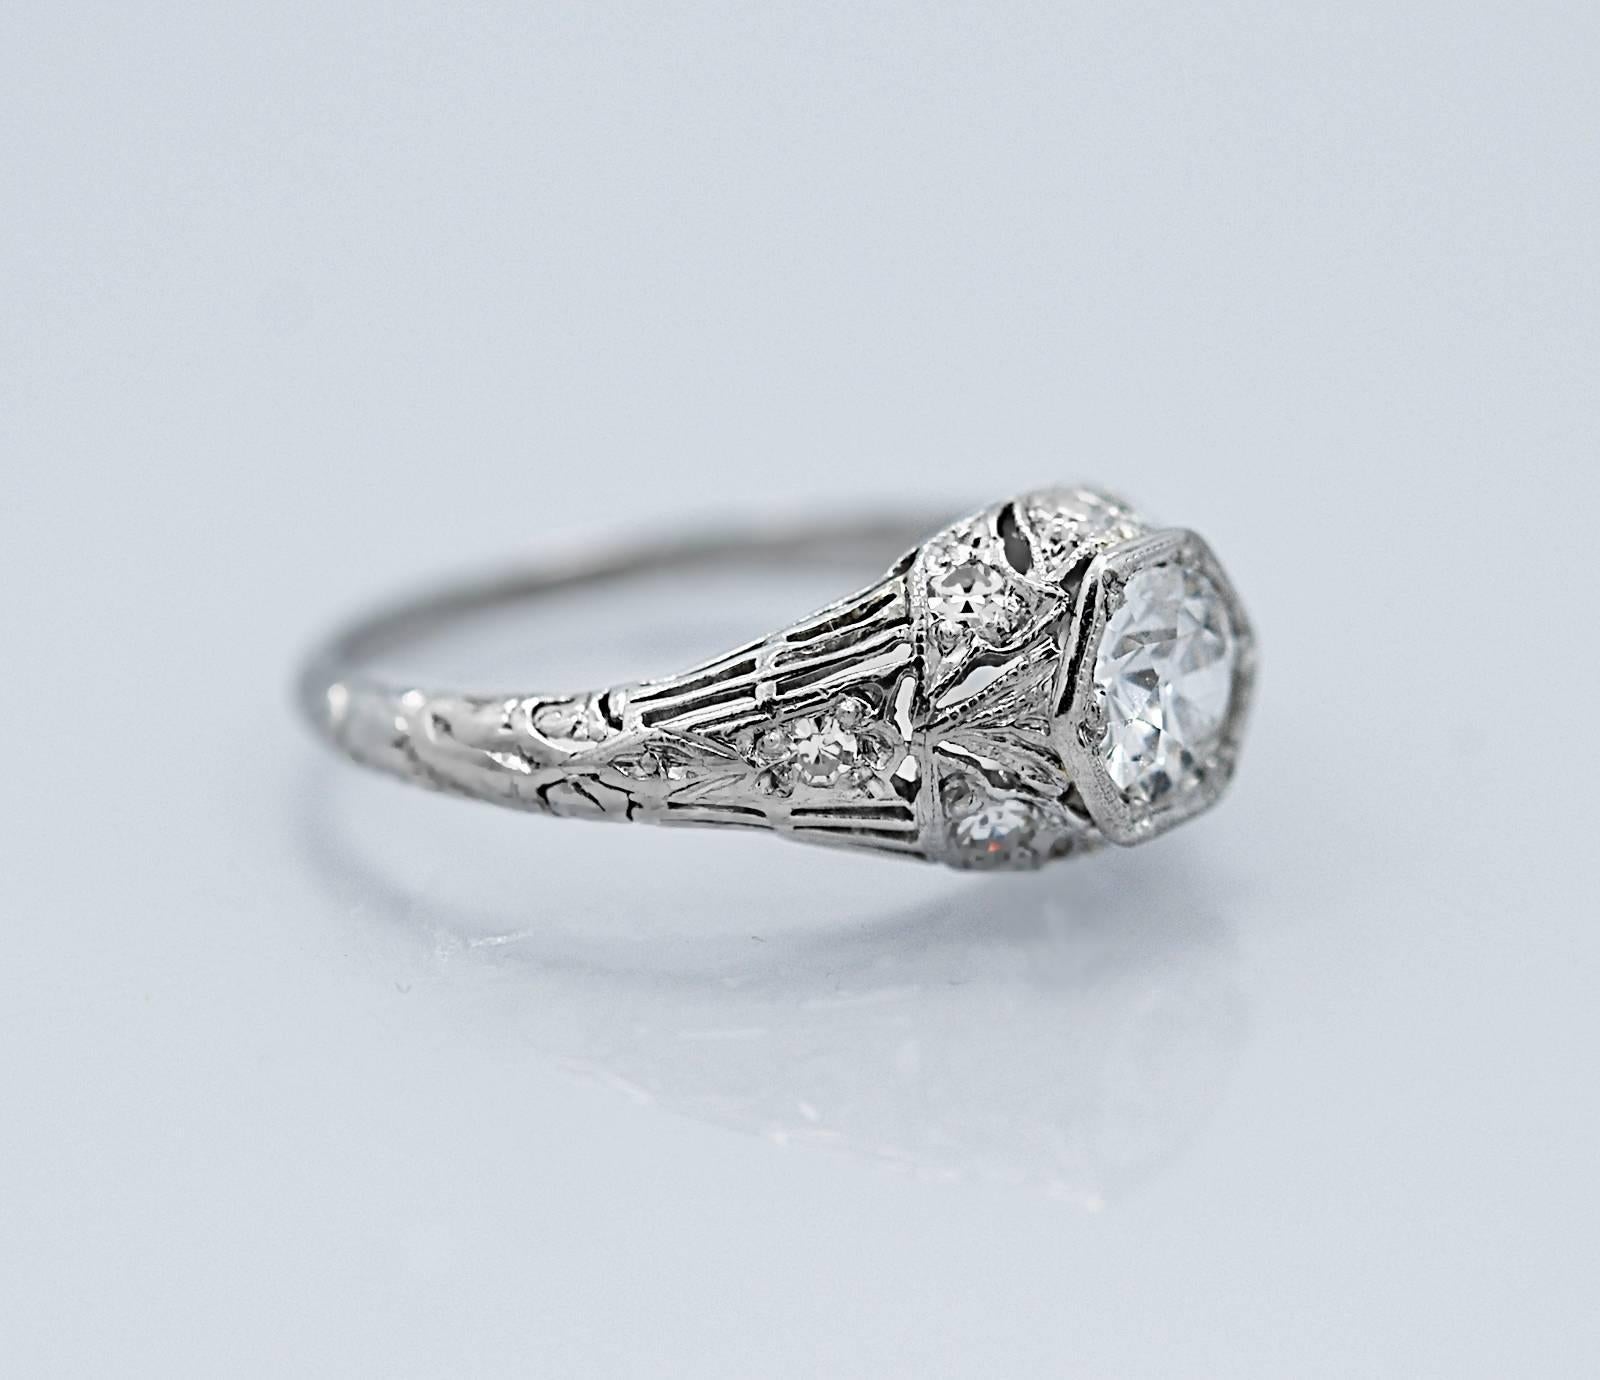 A sparkling and beautiful Platinum Art Deco diamond antique engagement ring that features a lovely .42ct. apx. European cut diamond with F color and SI1 clarity. The accenting single cut diamonds are VS1-VS2 clarity and G-H color. Lovely engraving,